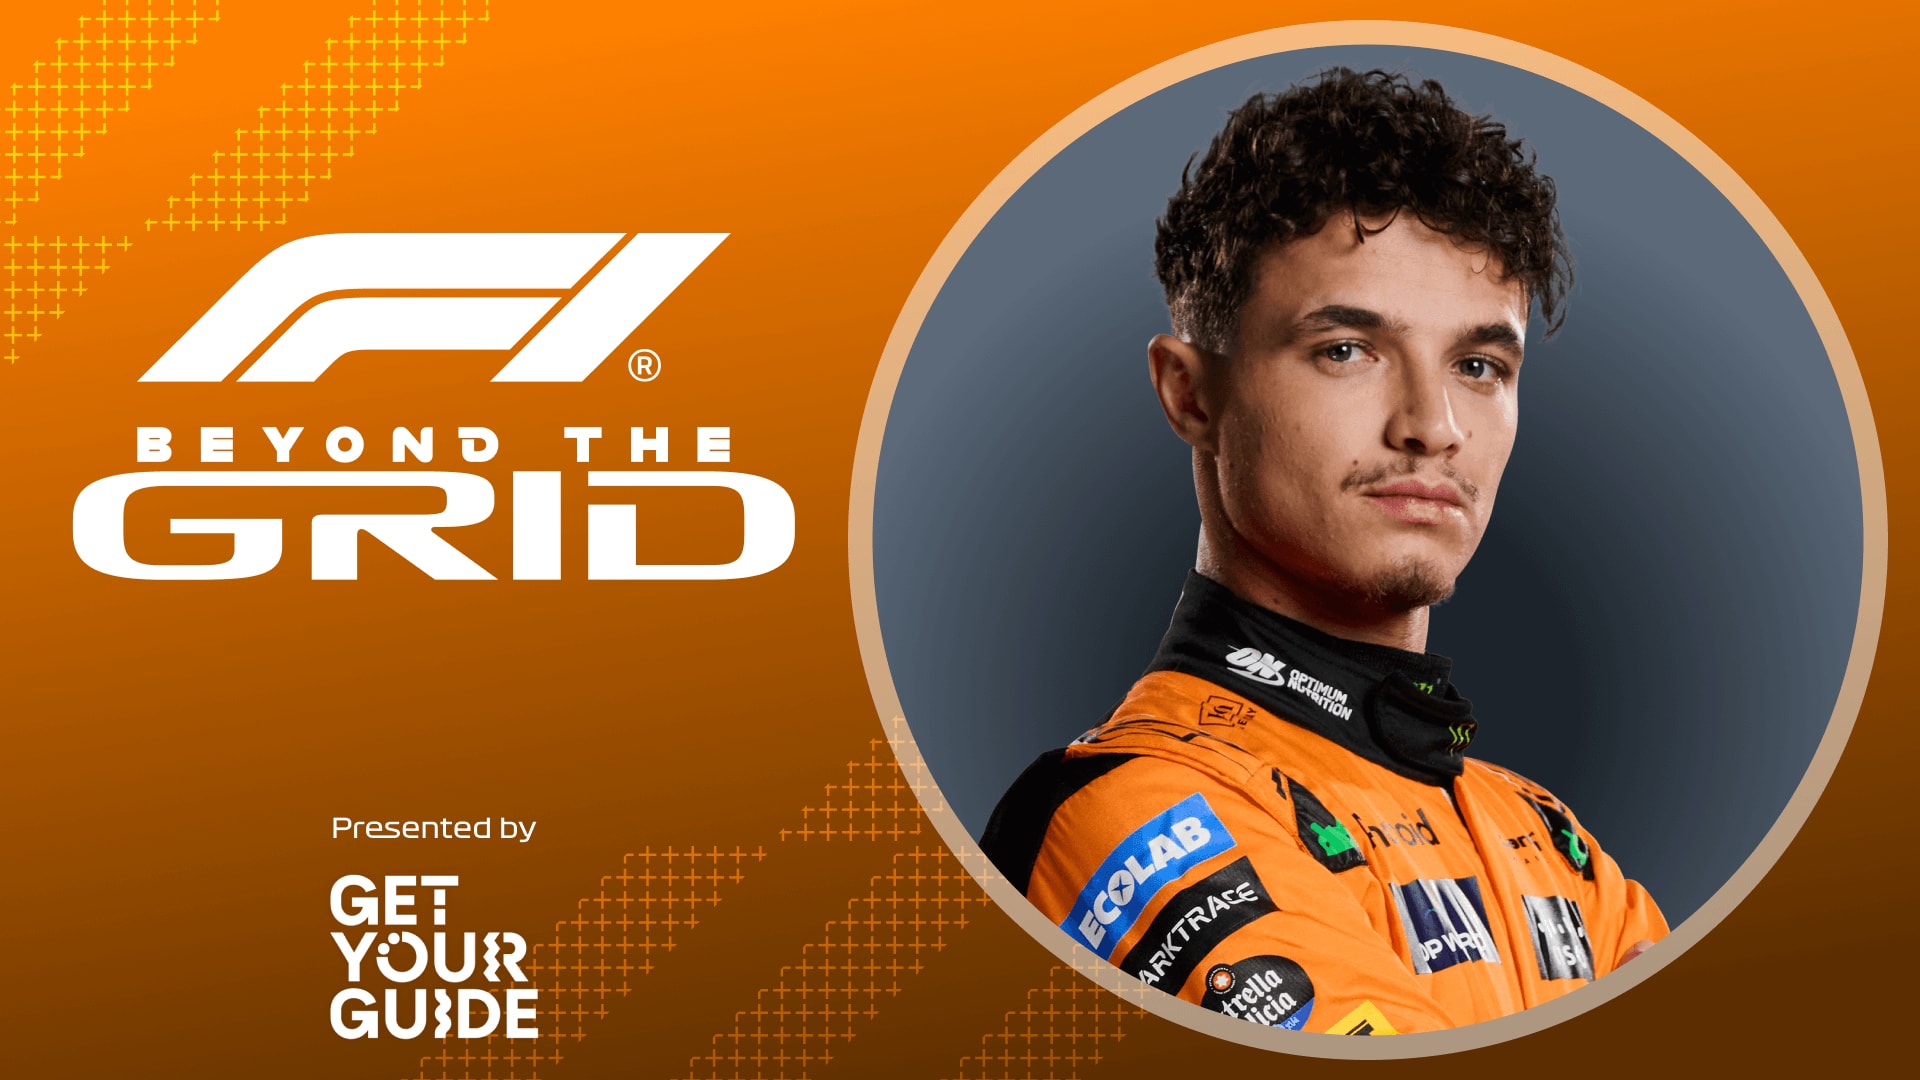 BEYOND THE GRID: Lando Norris on racing Verstappen, his maiden win in Miami and going for glory in Silverstone